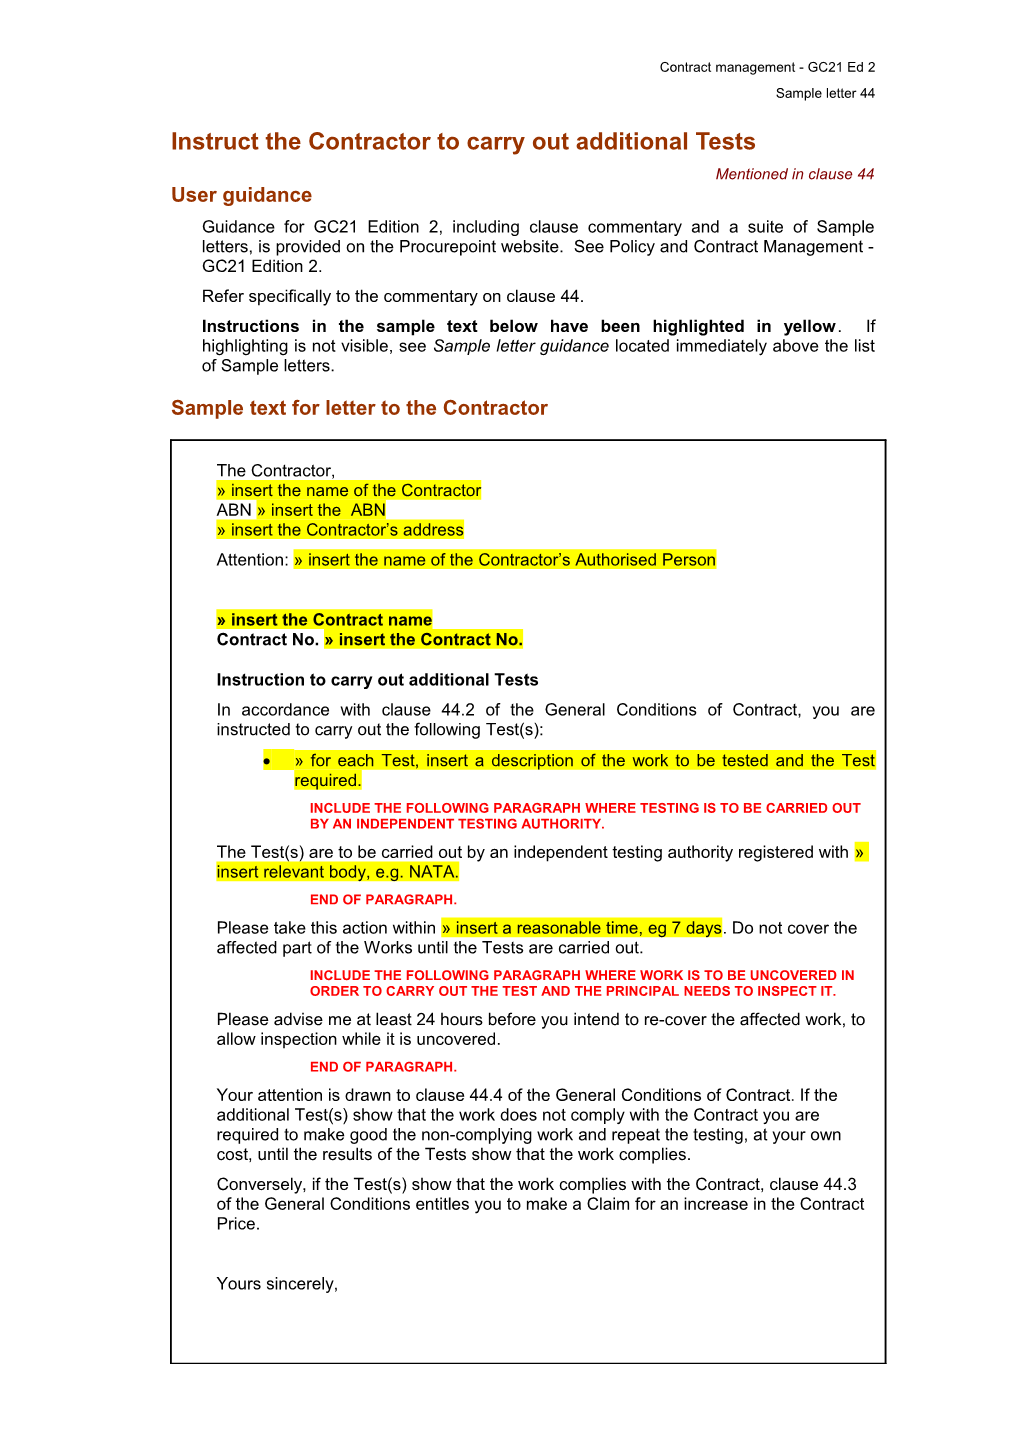 MW21 Sample Letter 8A - Instruct the Contractor to Uncover Or Test Work